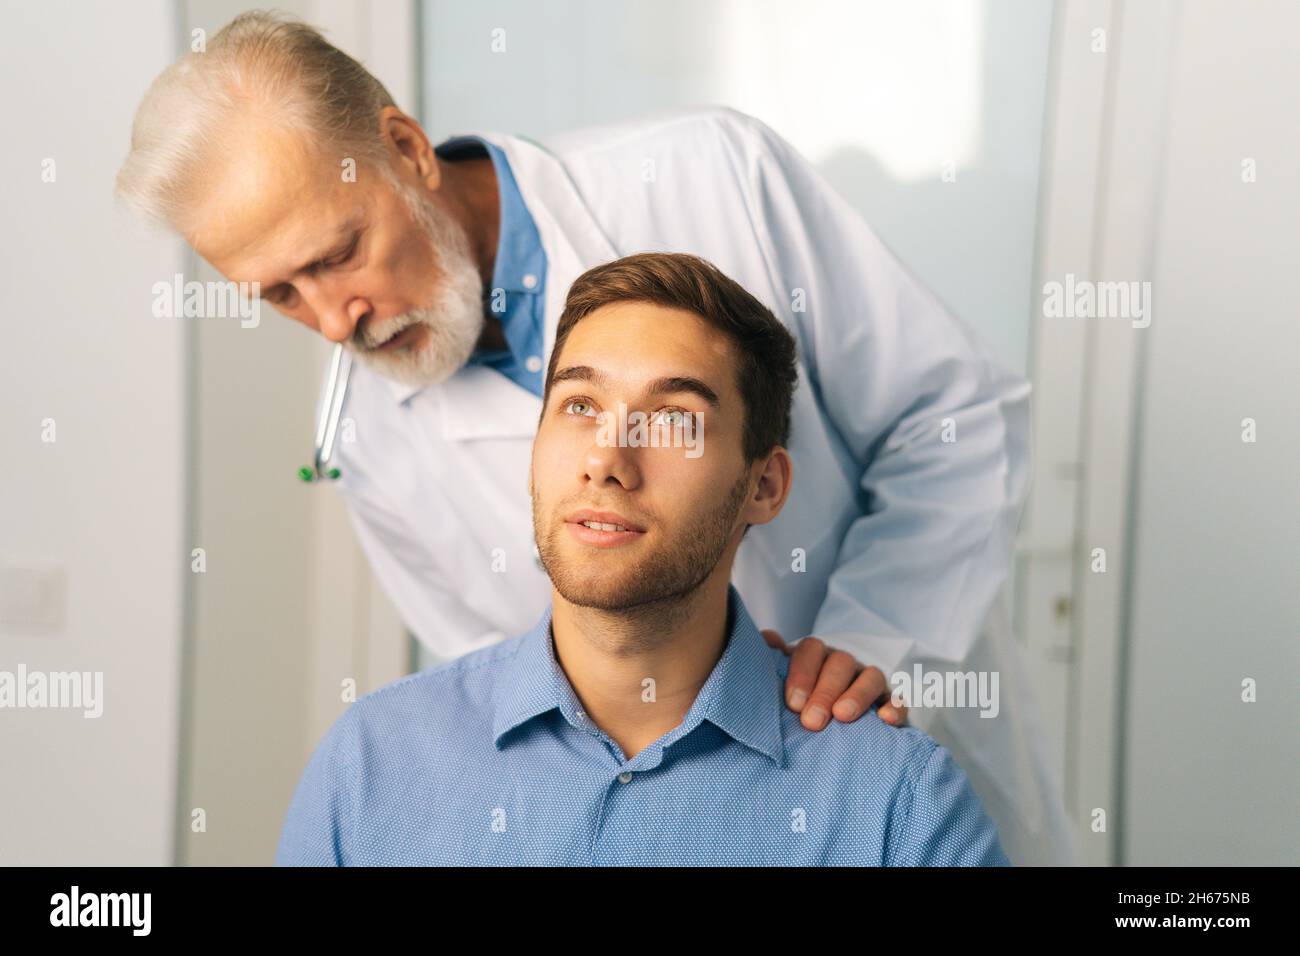 https://c8.alamy.com/comp/2H675NB/close-up-of-mature-adult-male-doctor-chiropractor-osteopath-talking-with-young-man-patient-sitting-in-chair-asks-about-problems-2H675NB.jpg